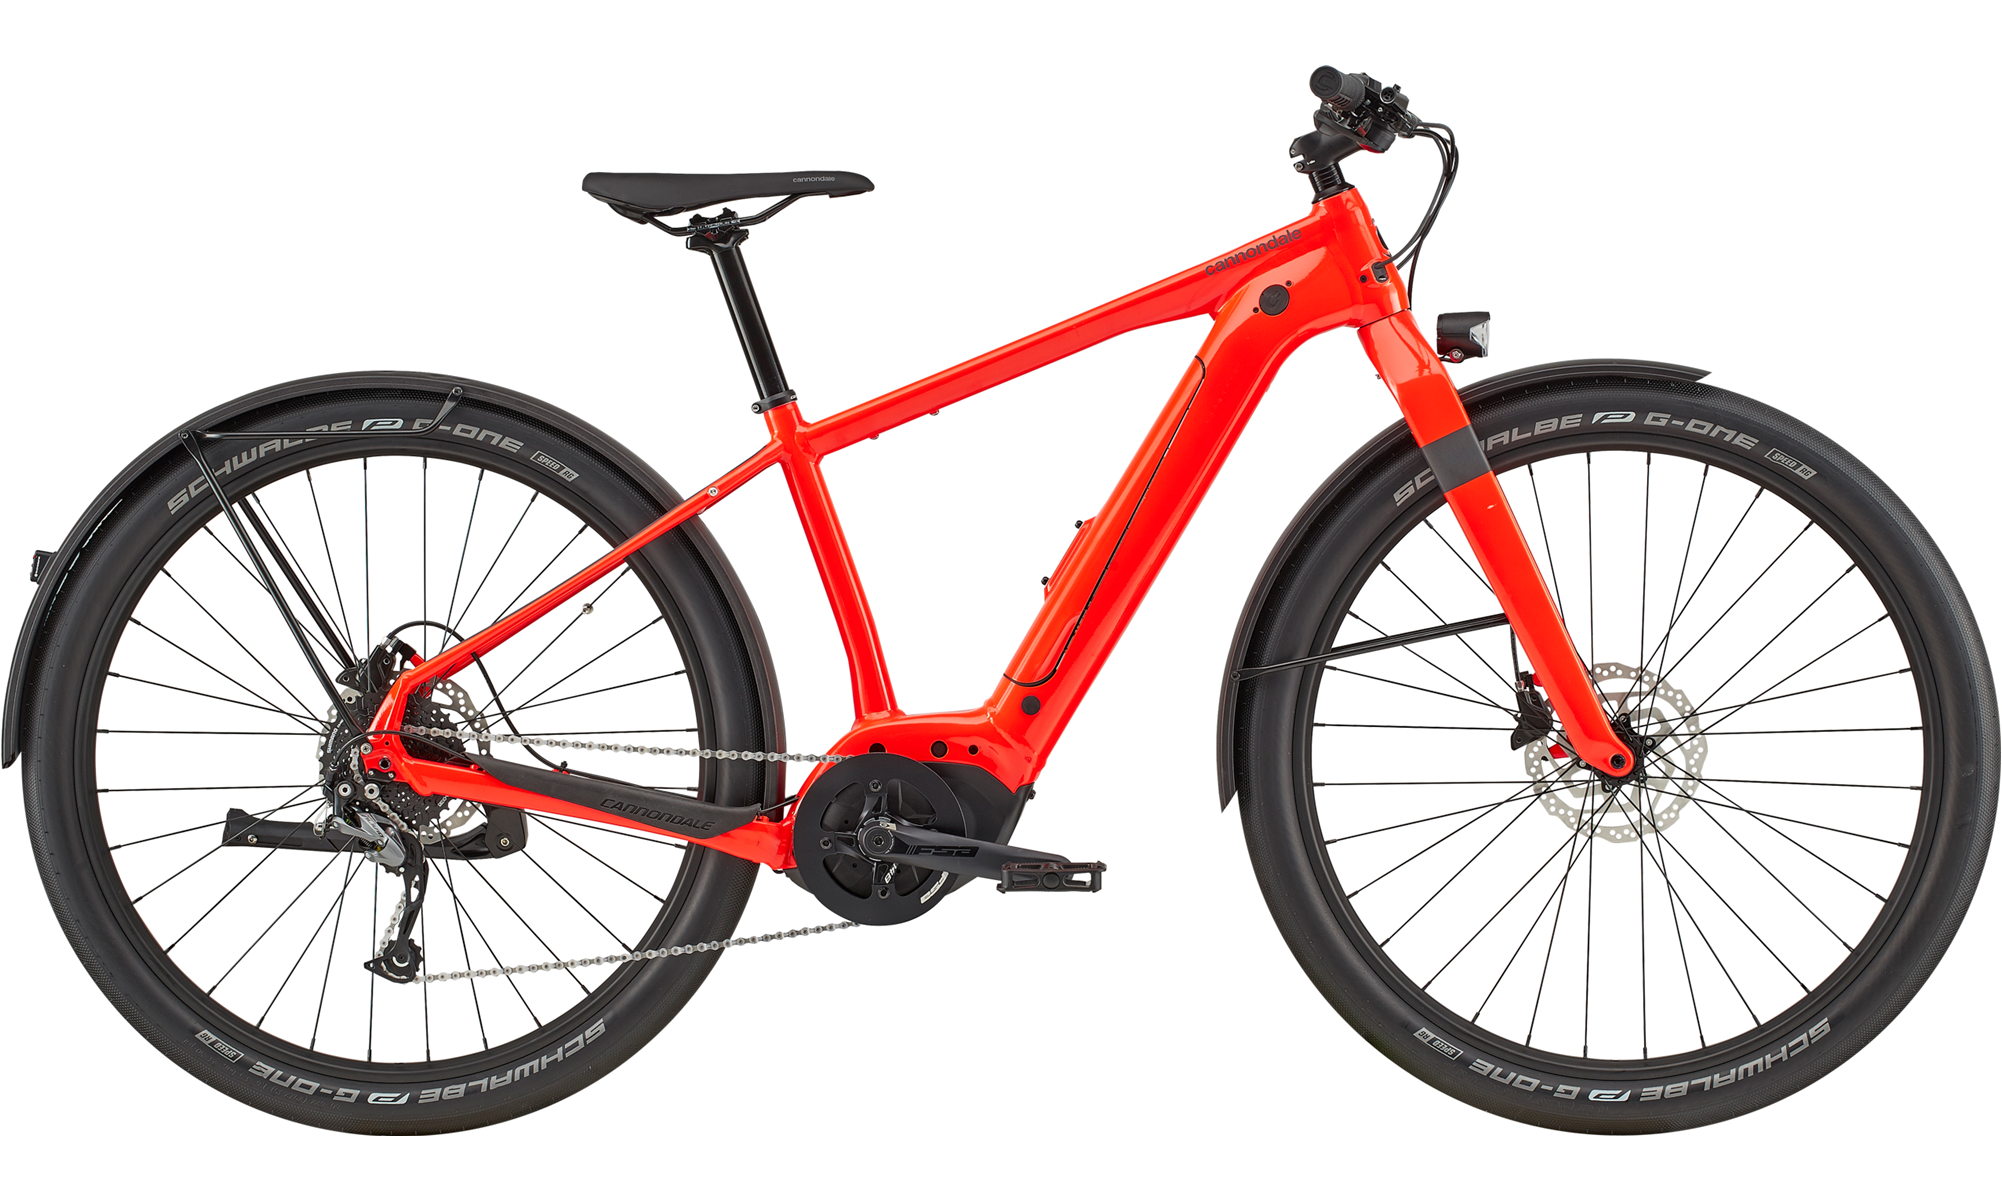 Paint for 2020 Cannondale Canvas Neo 2 (C64200M) - Gloss Acid Red